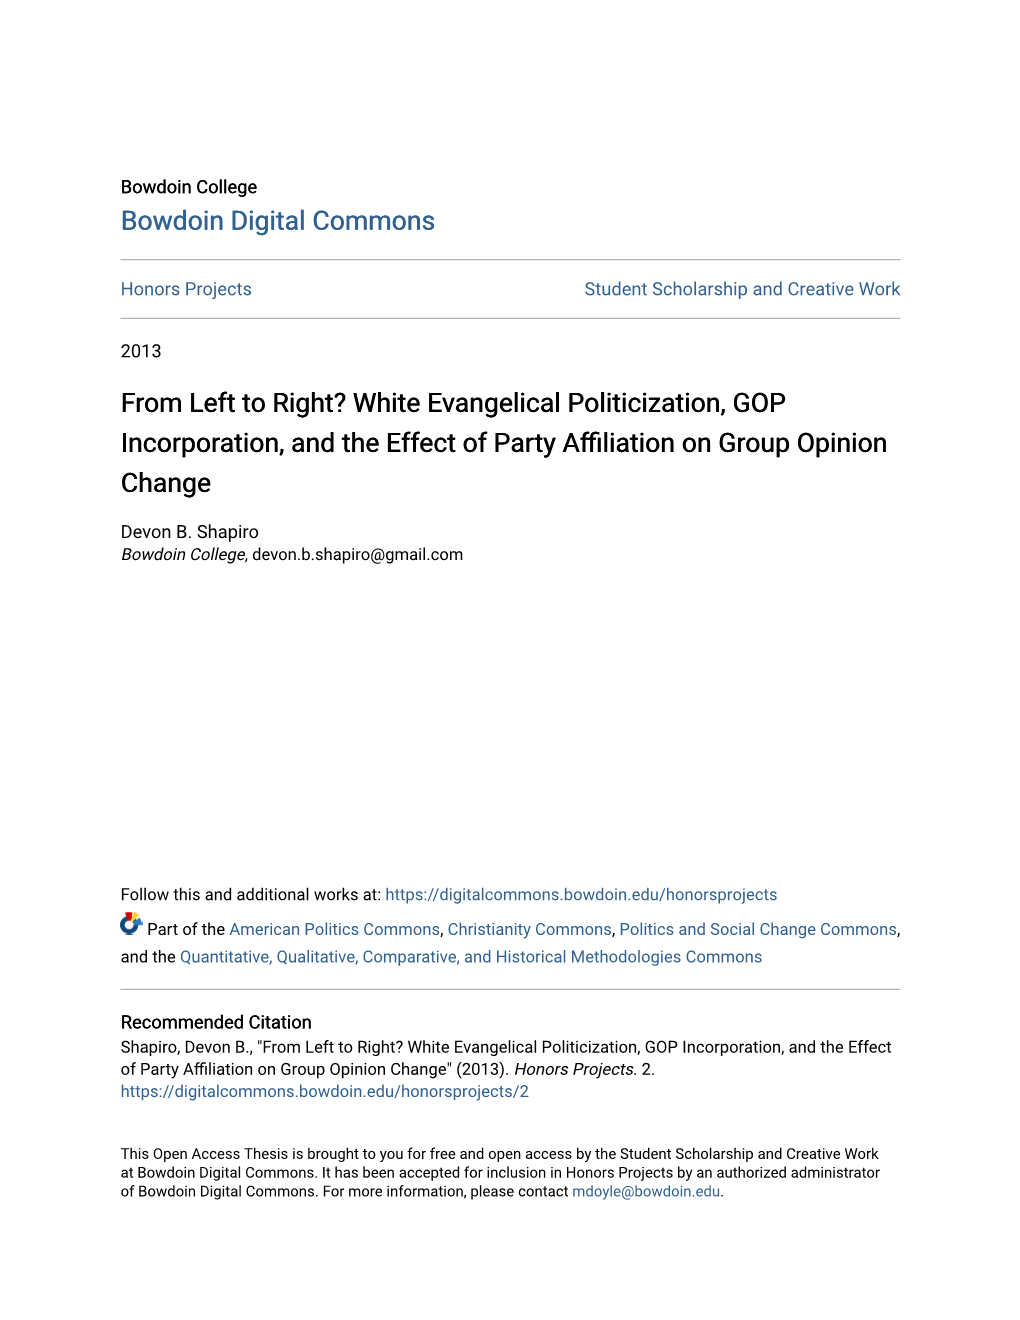 White Evangelical Politicization, GOP Incorporation, and the Effect of Party Affiliation on Oupgr Opinion Change